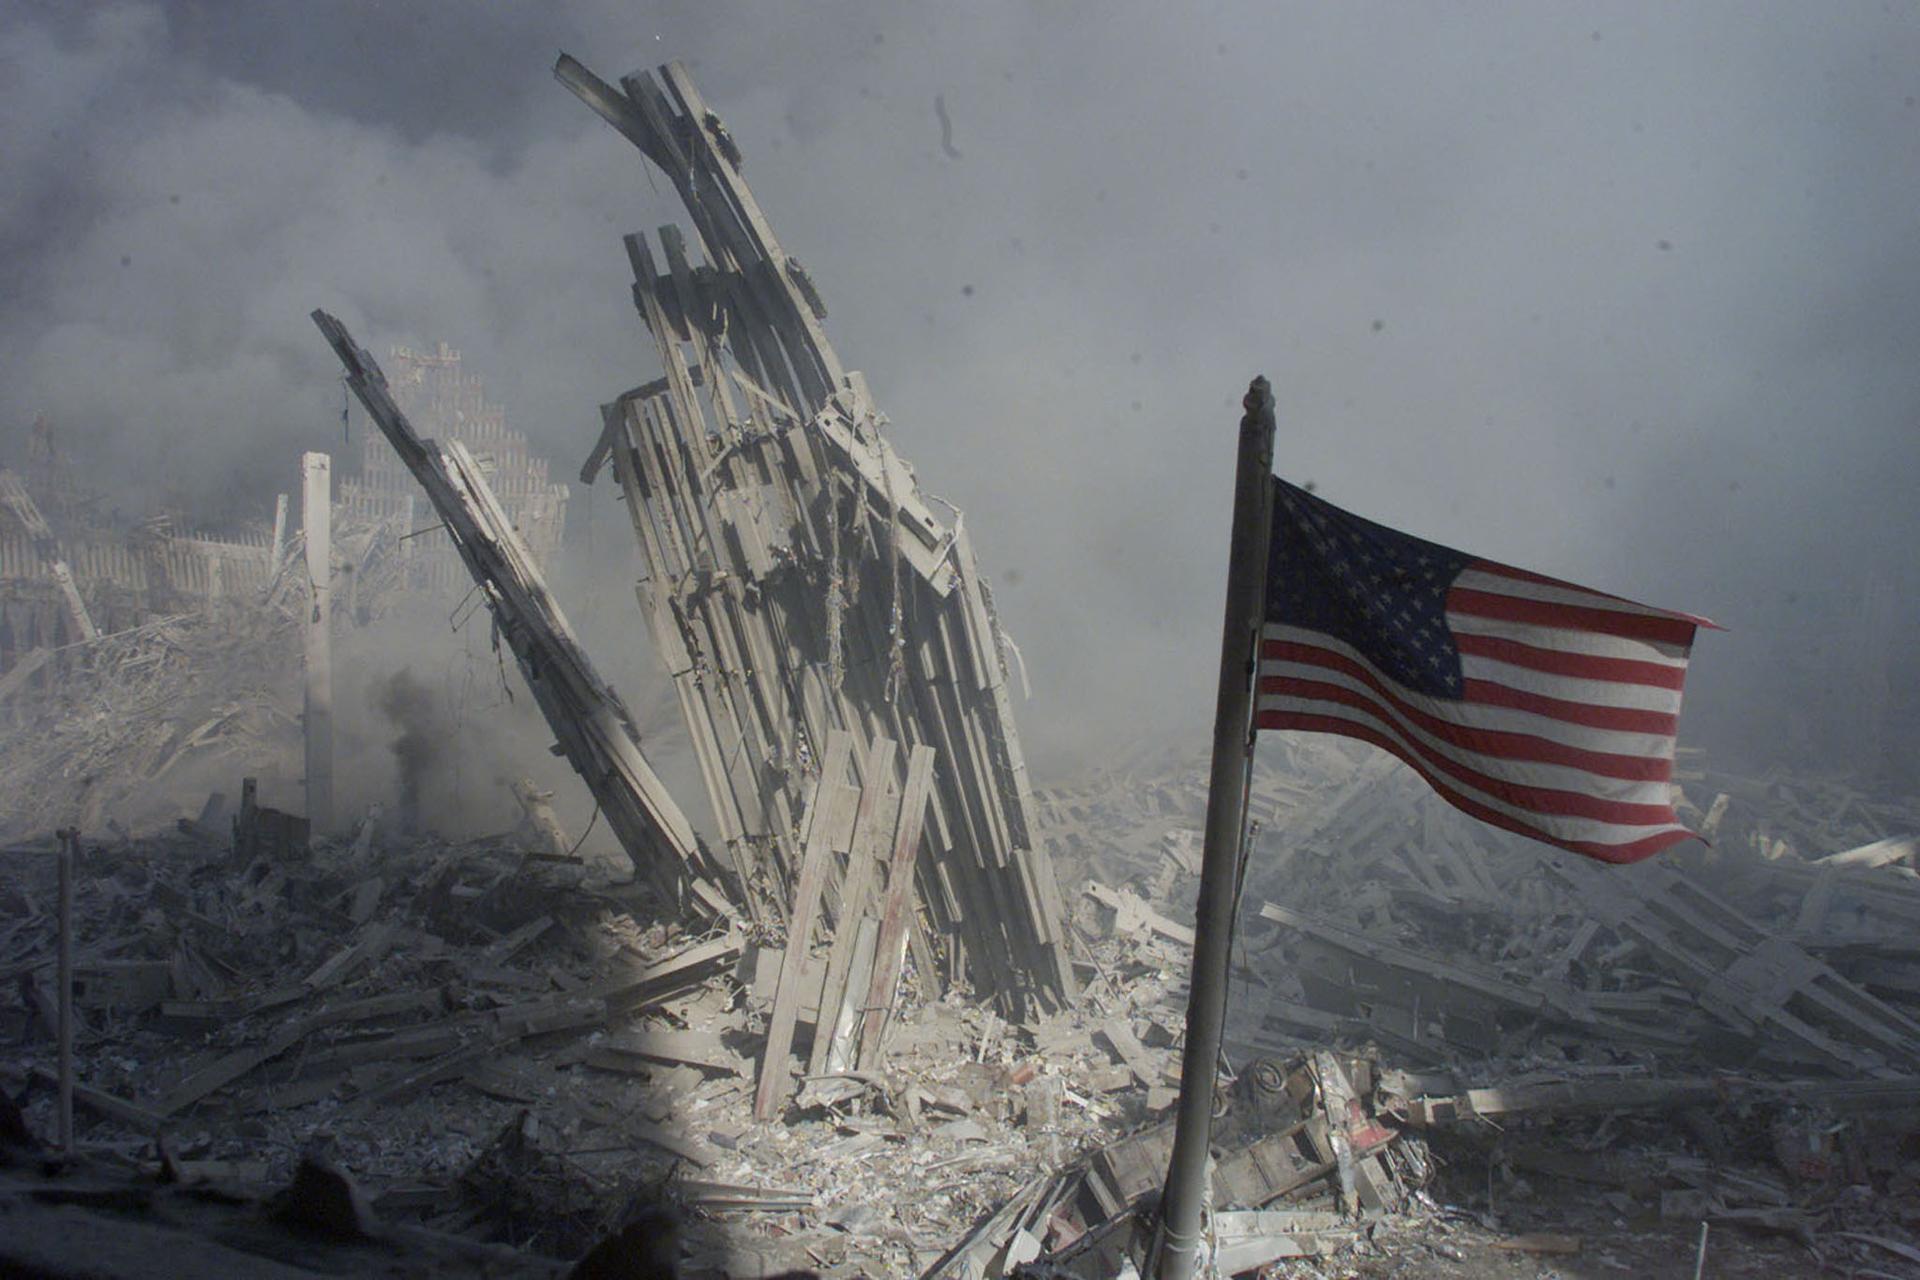 Rubble is highlighted and an American flag is in the foreground